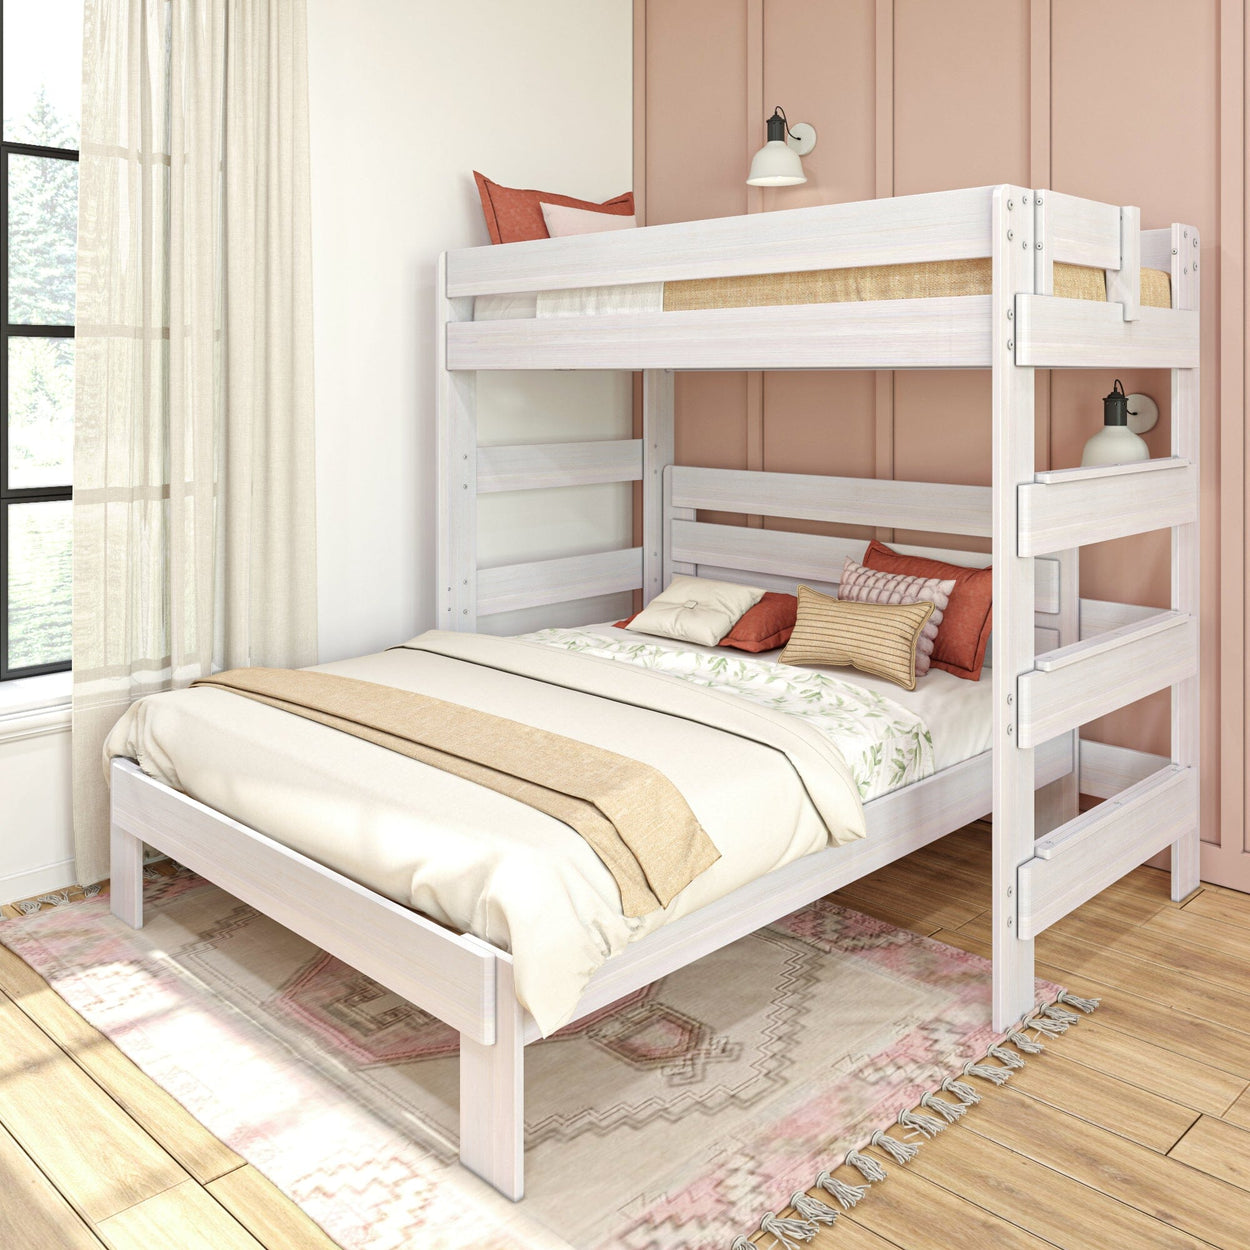 19-813-182 : Bunk Beds Farmhouse Twin over Queen L-Shaped Bunk Bed, White Wash